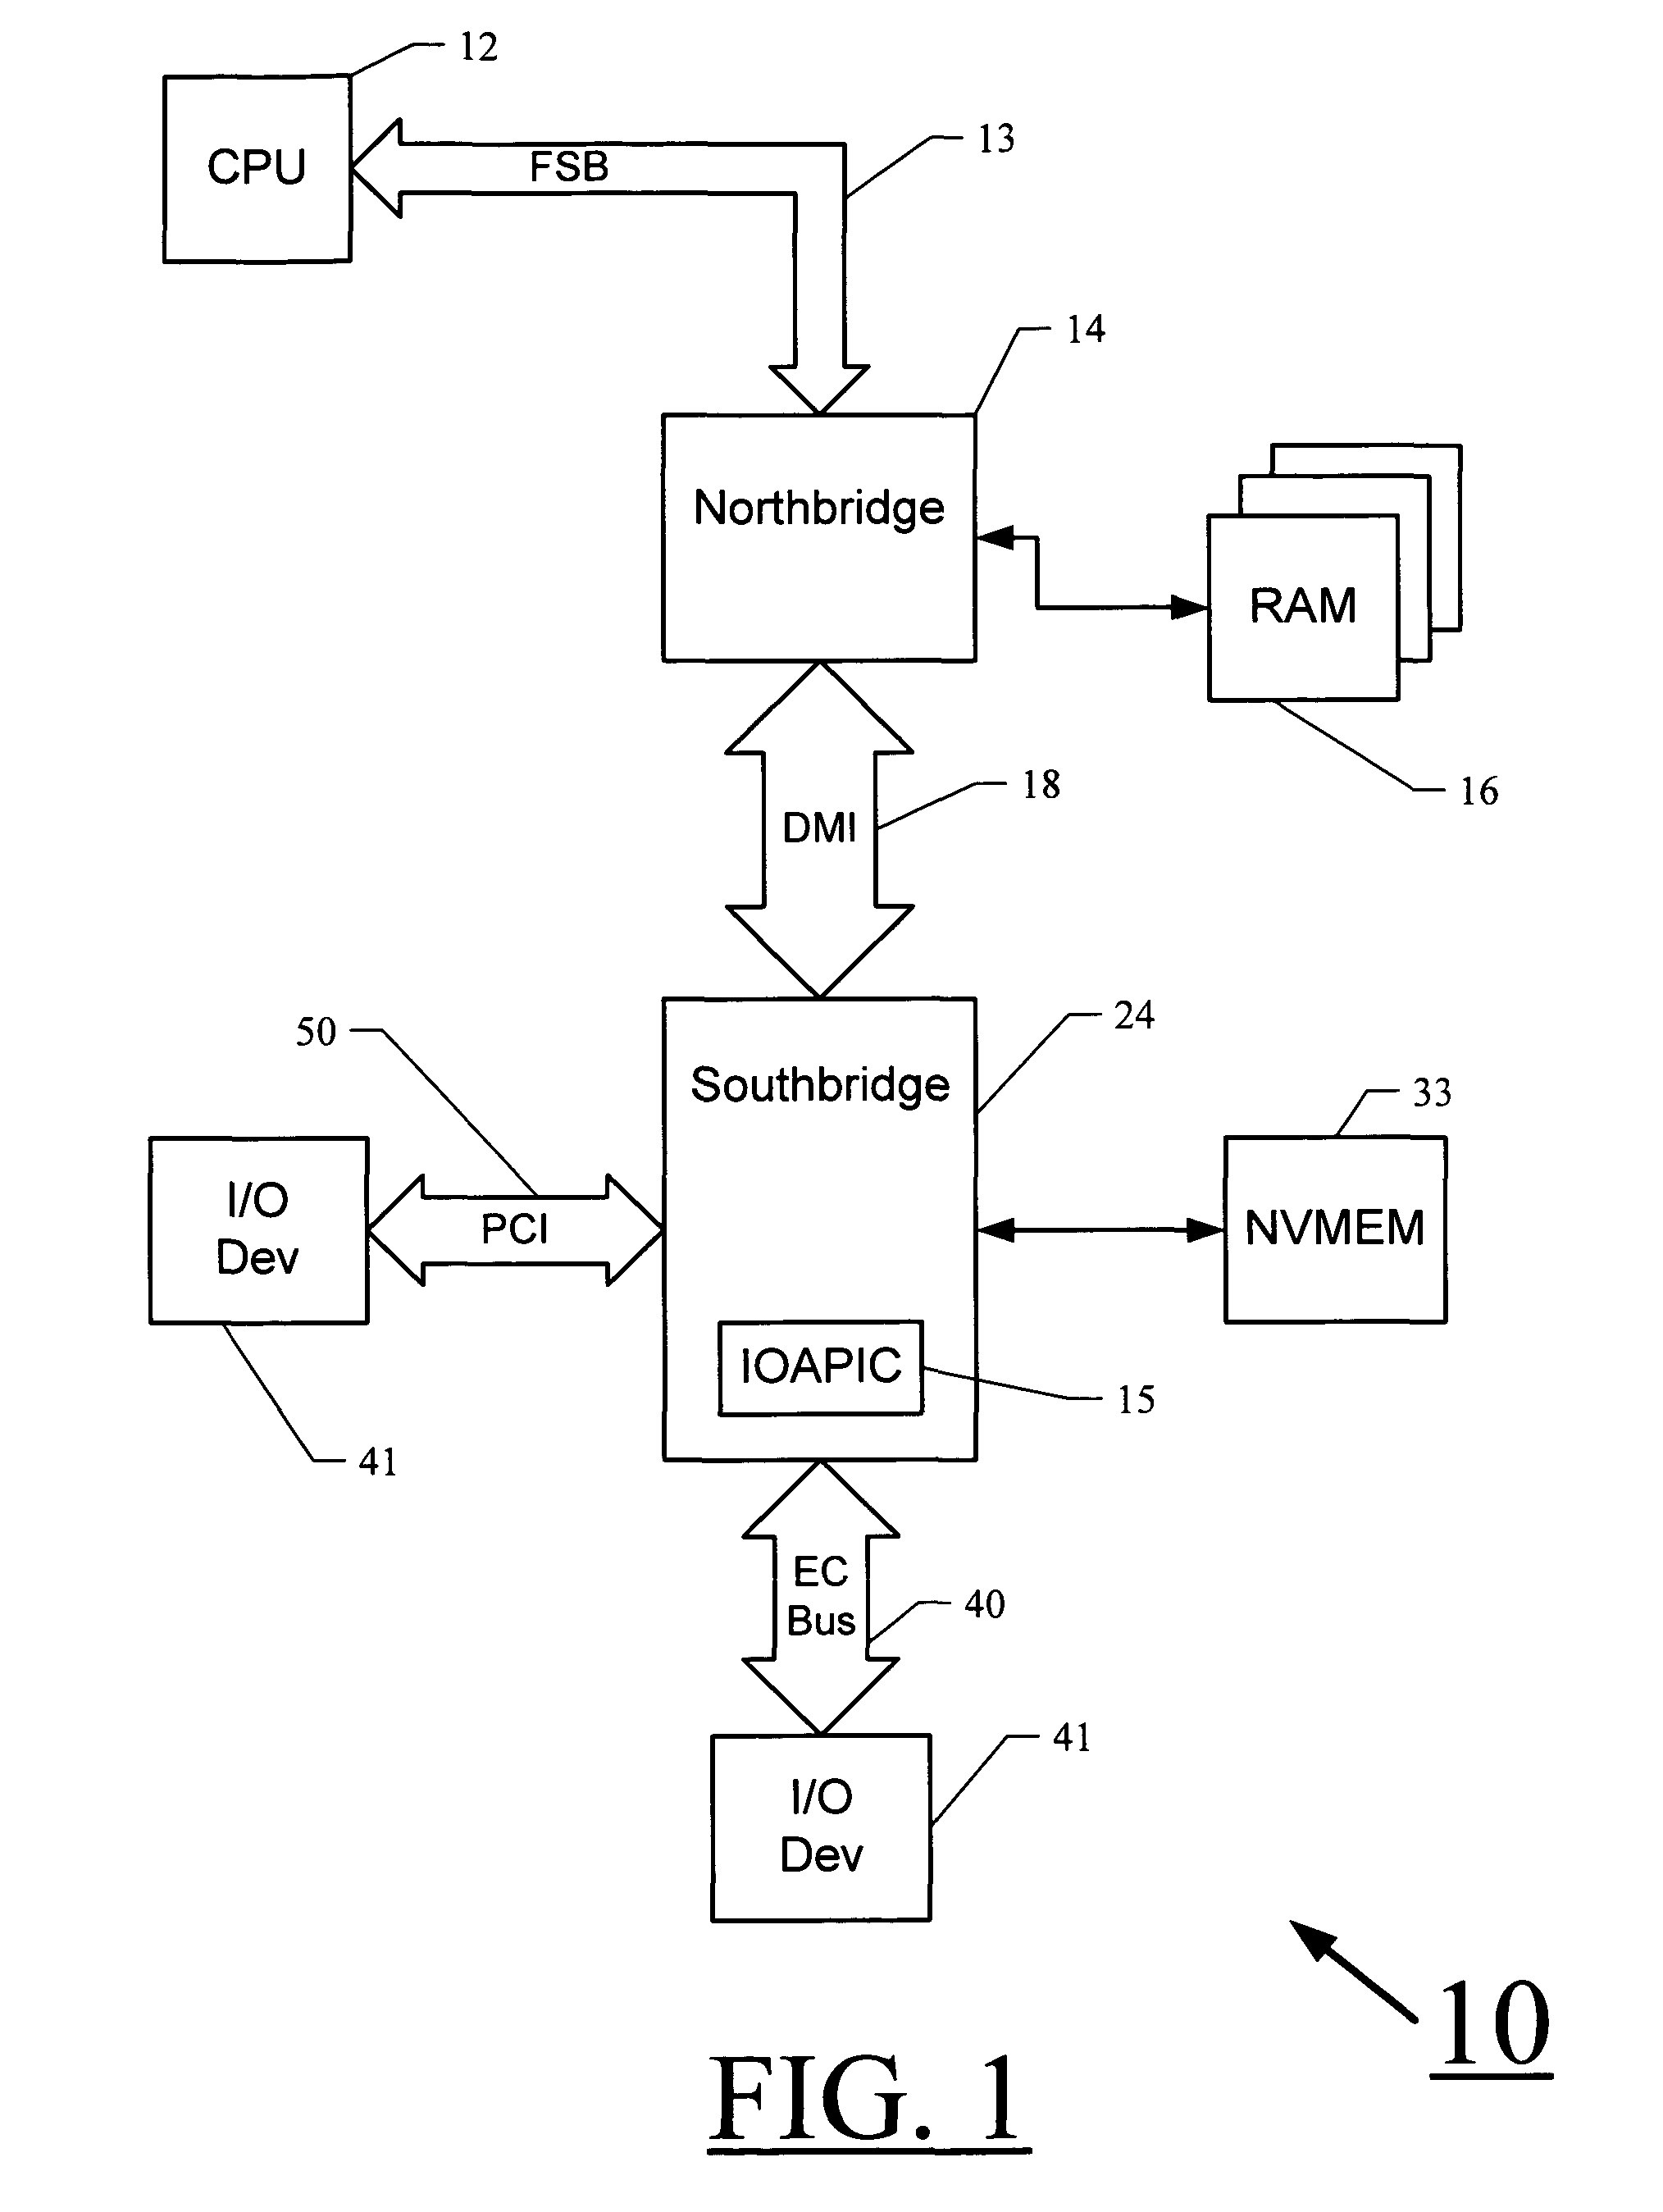 Emulating a line-based interrupt transaction in response to a message signaled interrupt